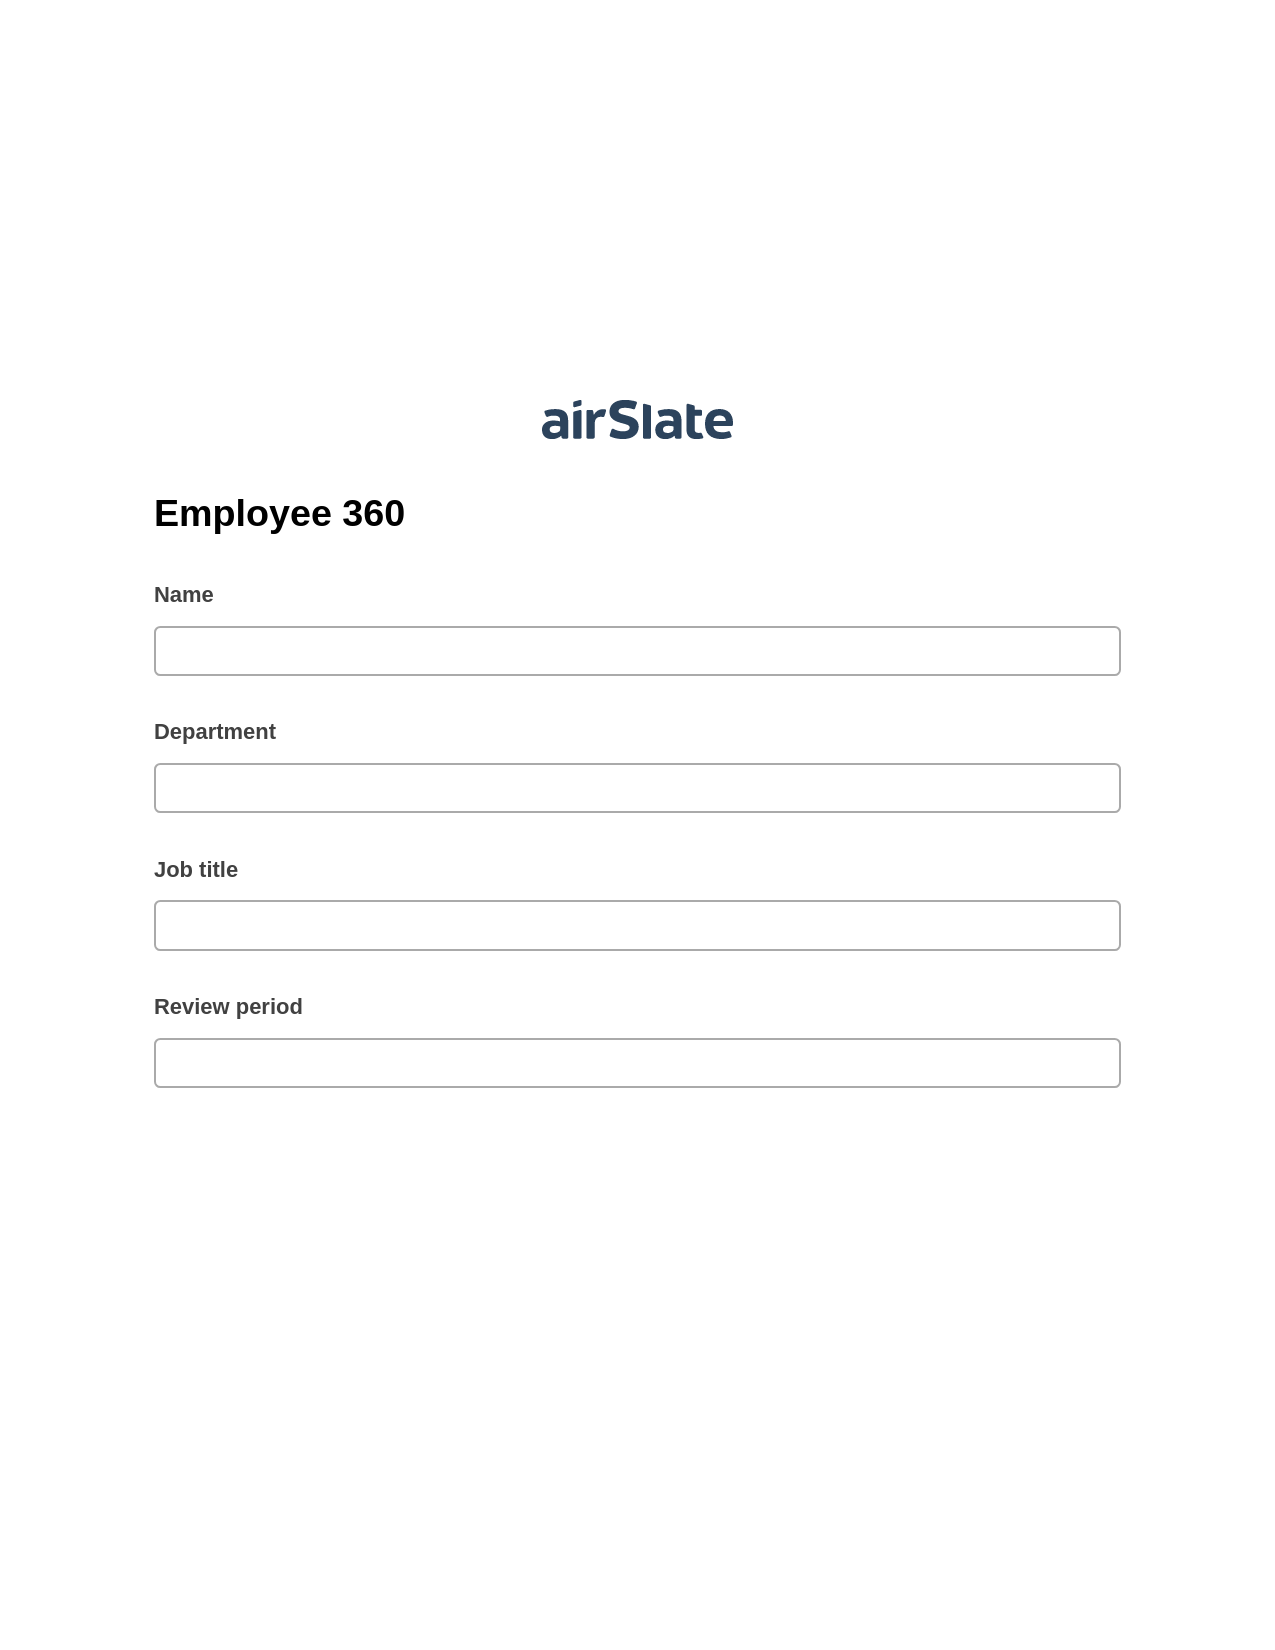 Employee 360 Pre-fill Dropdowns from Airtable, Update MS Dynamics 365 Record Bot, Archive to Box Bot